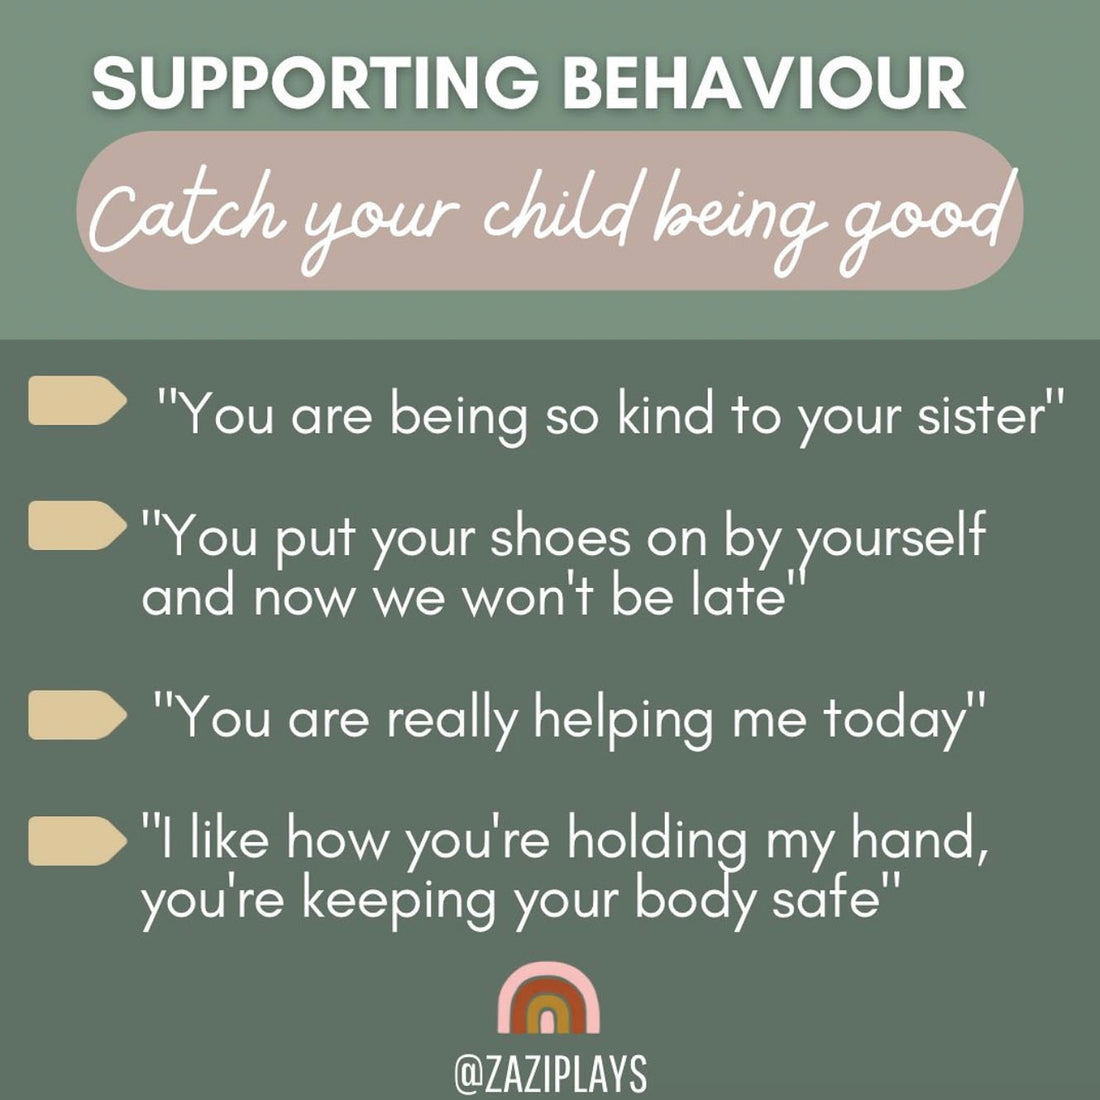 Supporting Behaviour: Catch your Child being Good